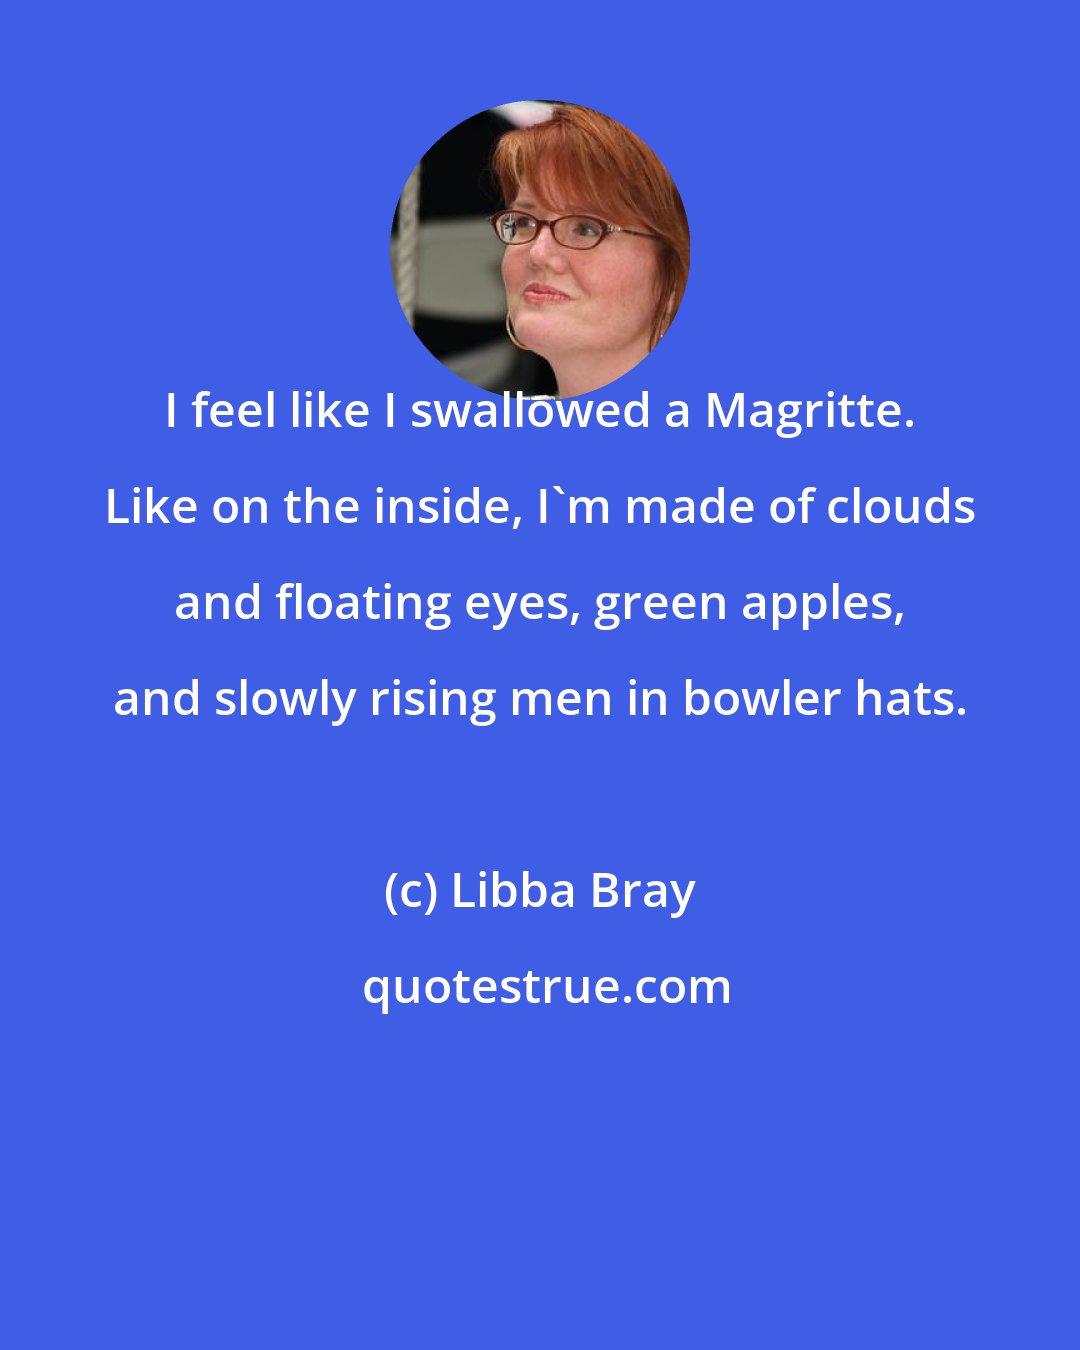 Libba Bray: I feel like I swallowed a Magritte. Like on the inside, I'm made of clouds and floating eyes, green apples, and slowly rising men in bowler hats.